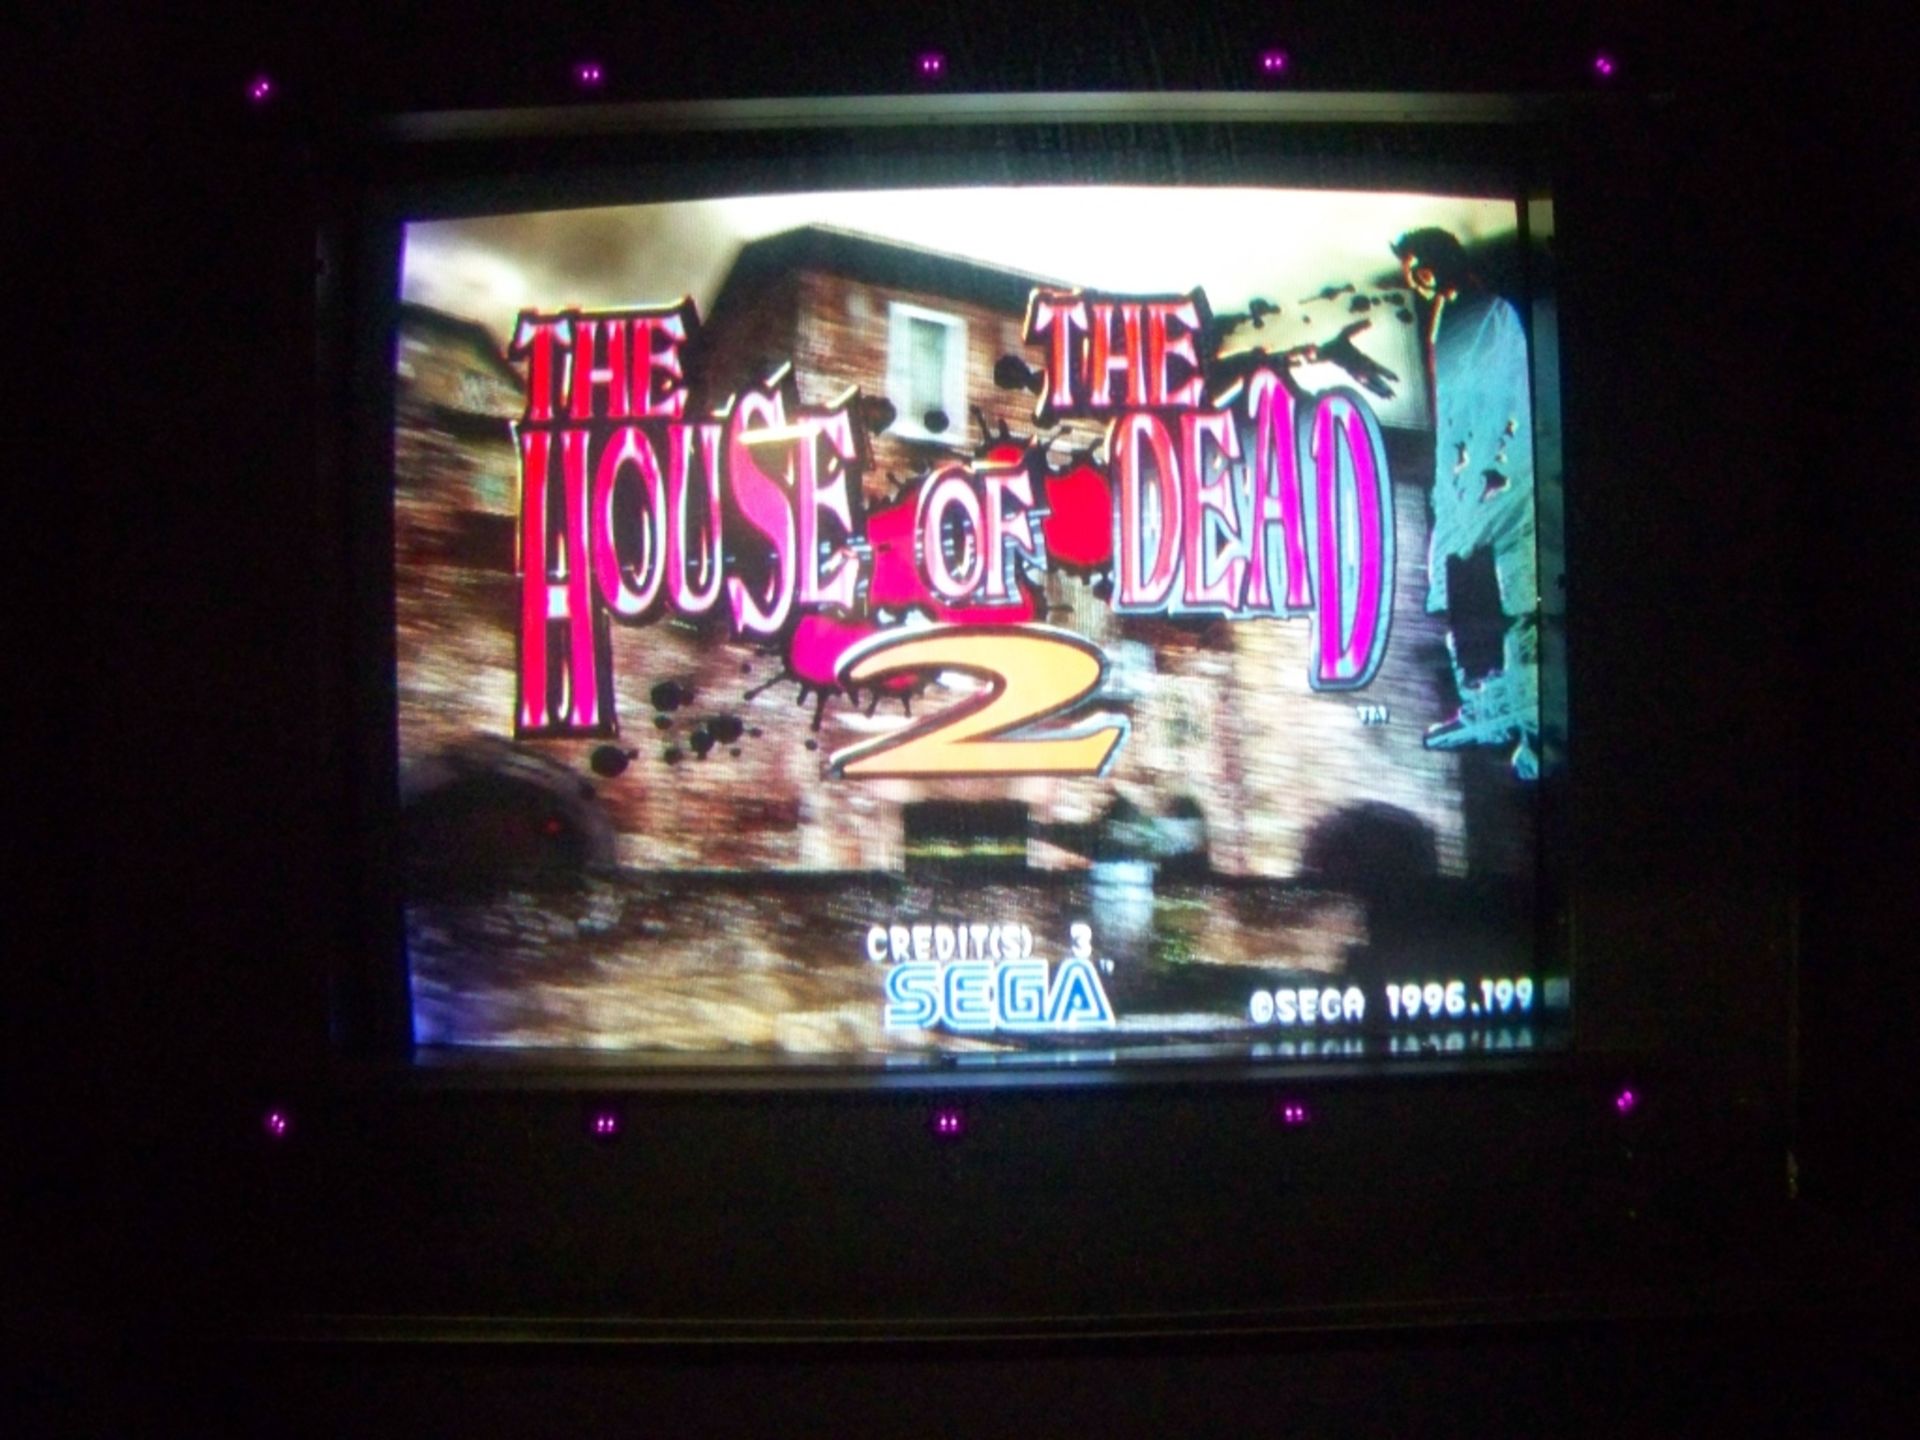 HOUSE OF THE DEAD 2 ZOMBIE SHOOTER ARCADE GAME